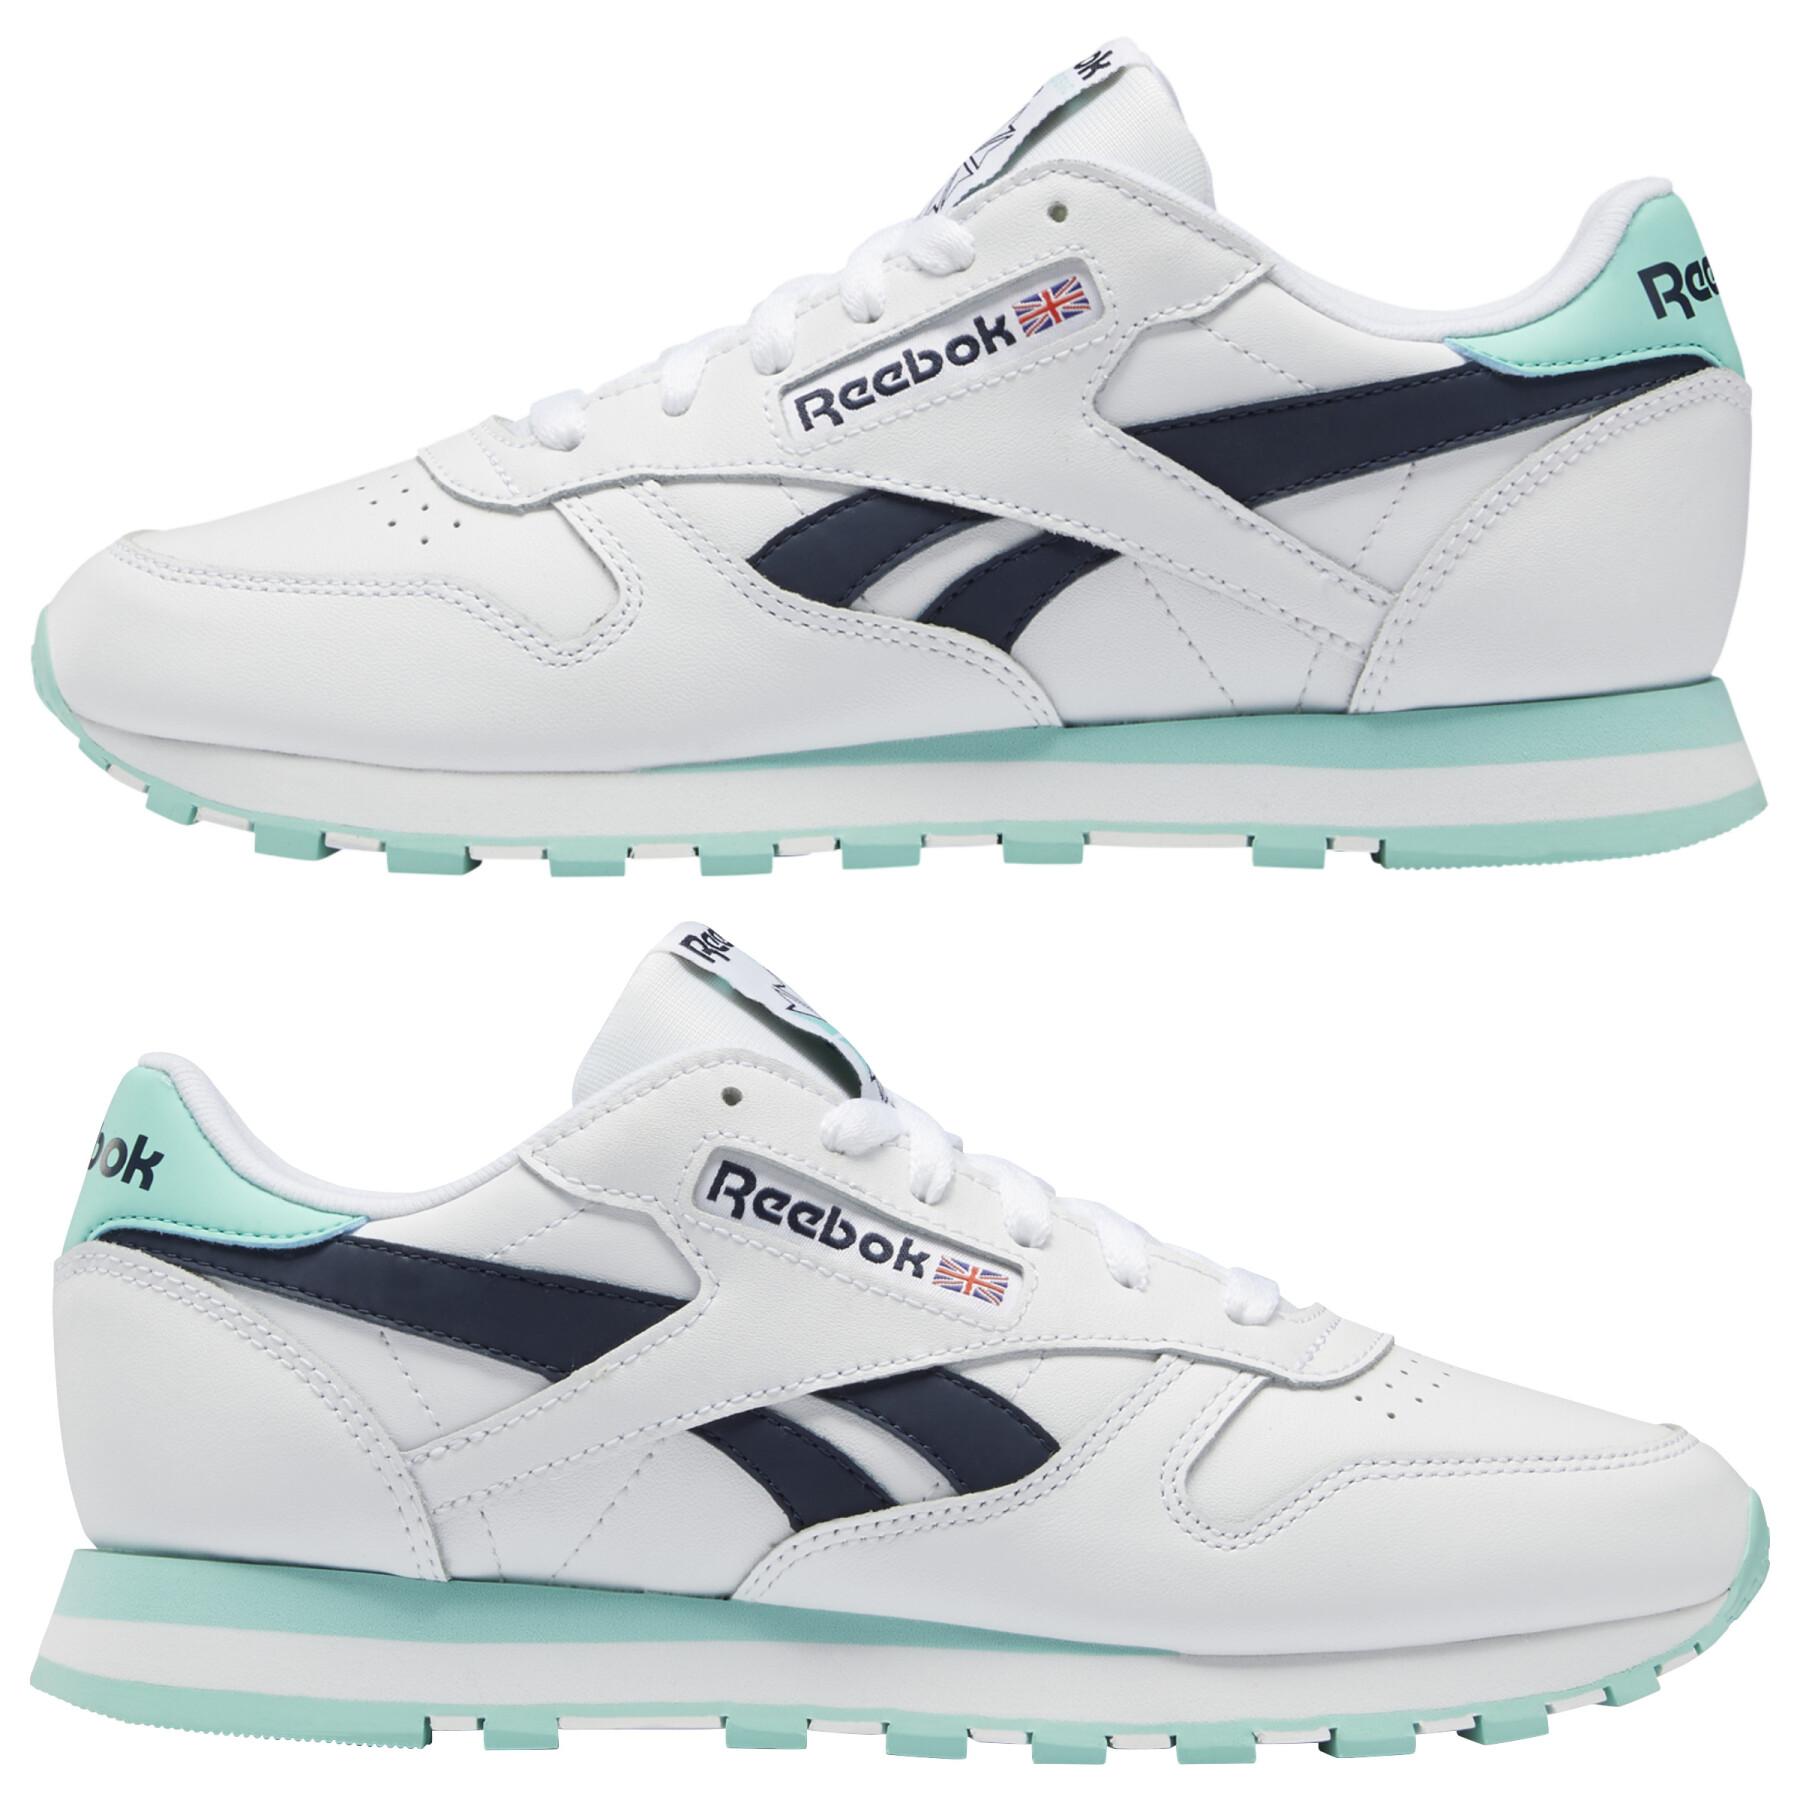 Chaussures femme Reebok Classic Leather